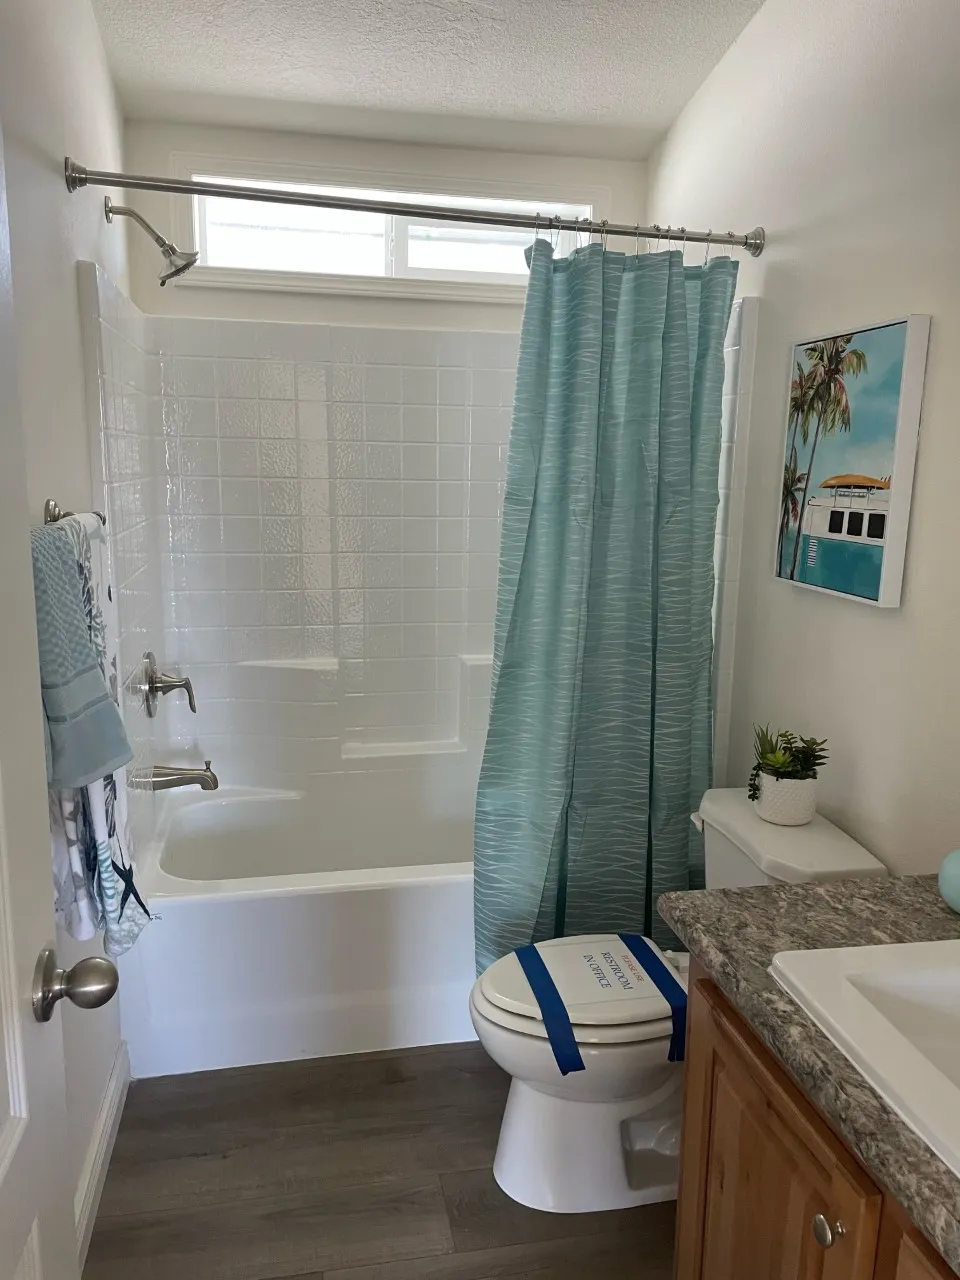 Tub/shower combo in guest bathroom